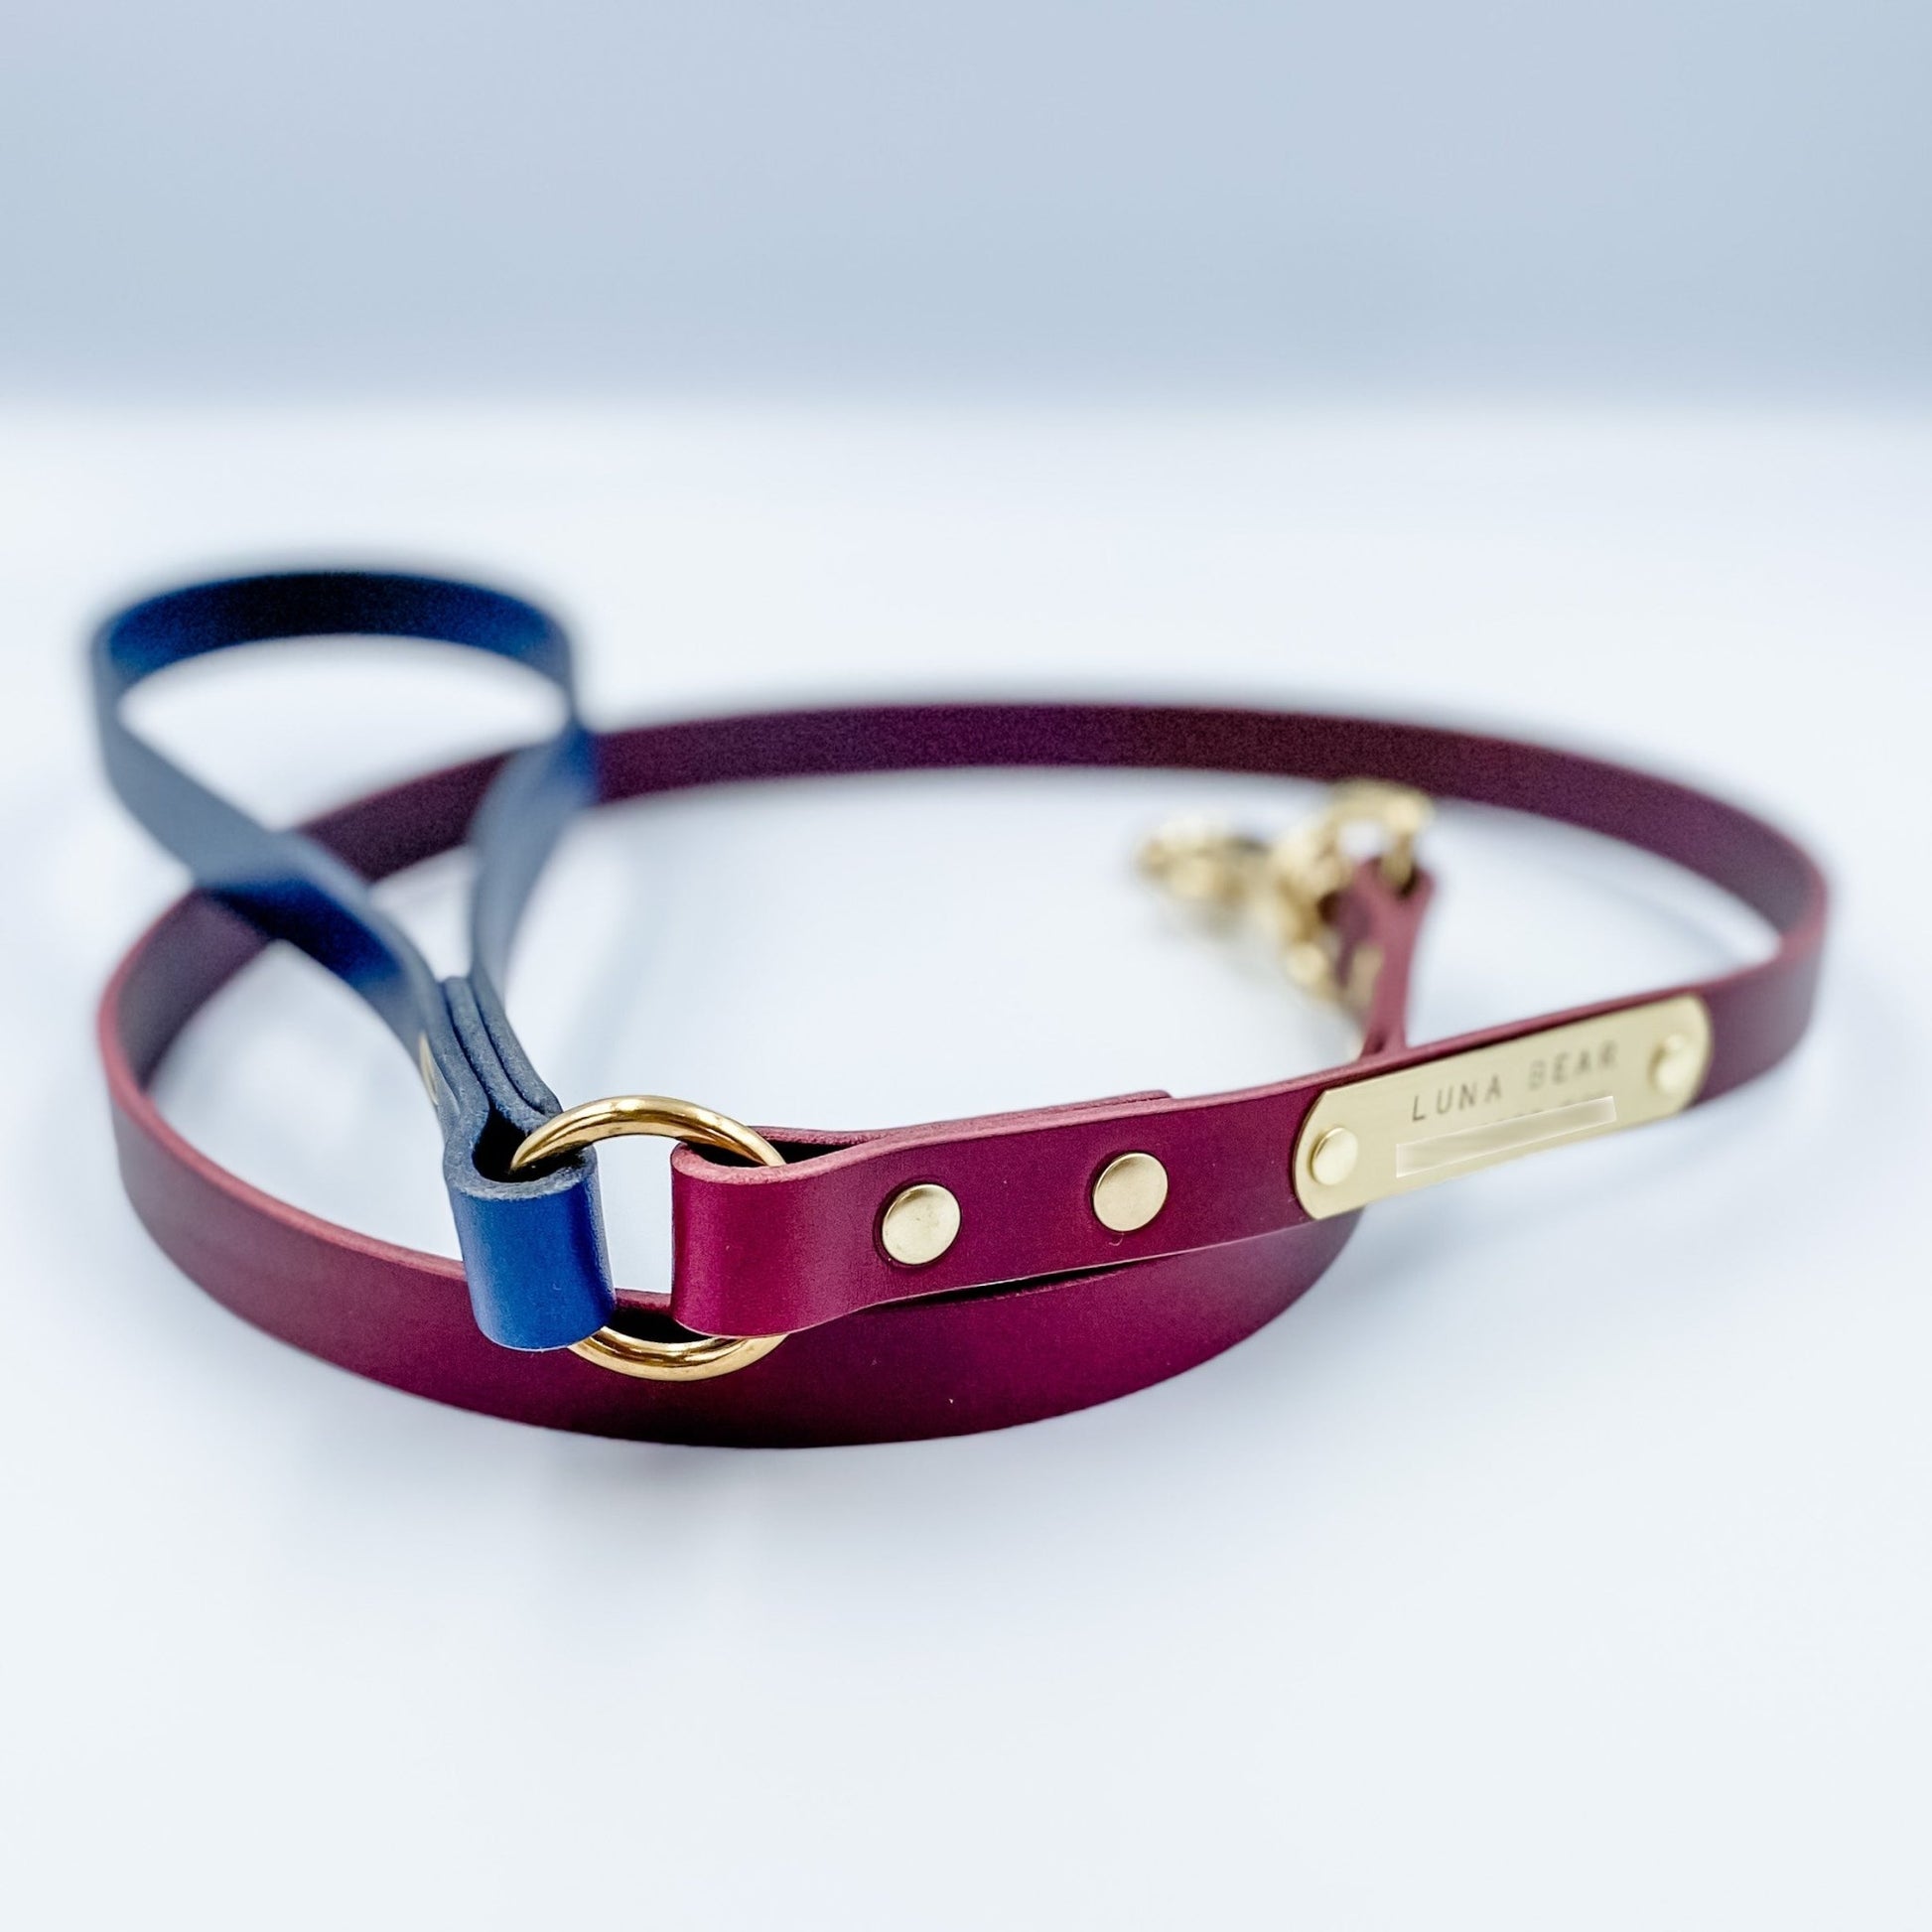 Leather & Solid Brass Dog Leash / Lead (with customisable handle) - 1/2" (12mm) Gold - Kinfolk Leather